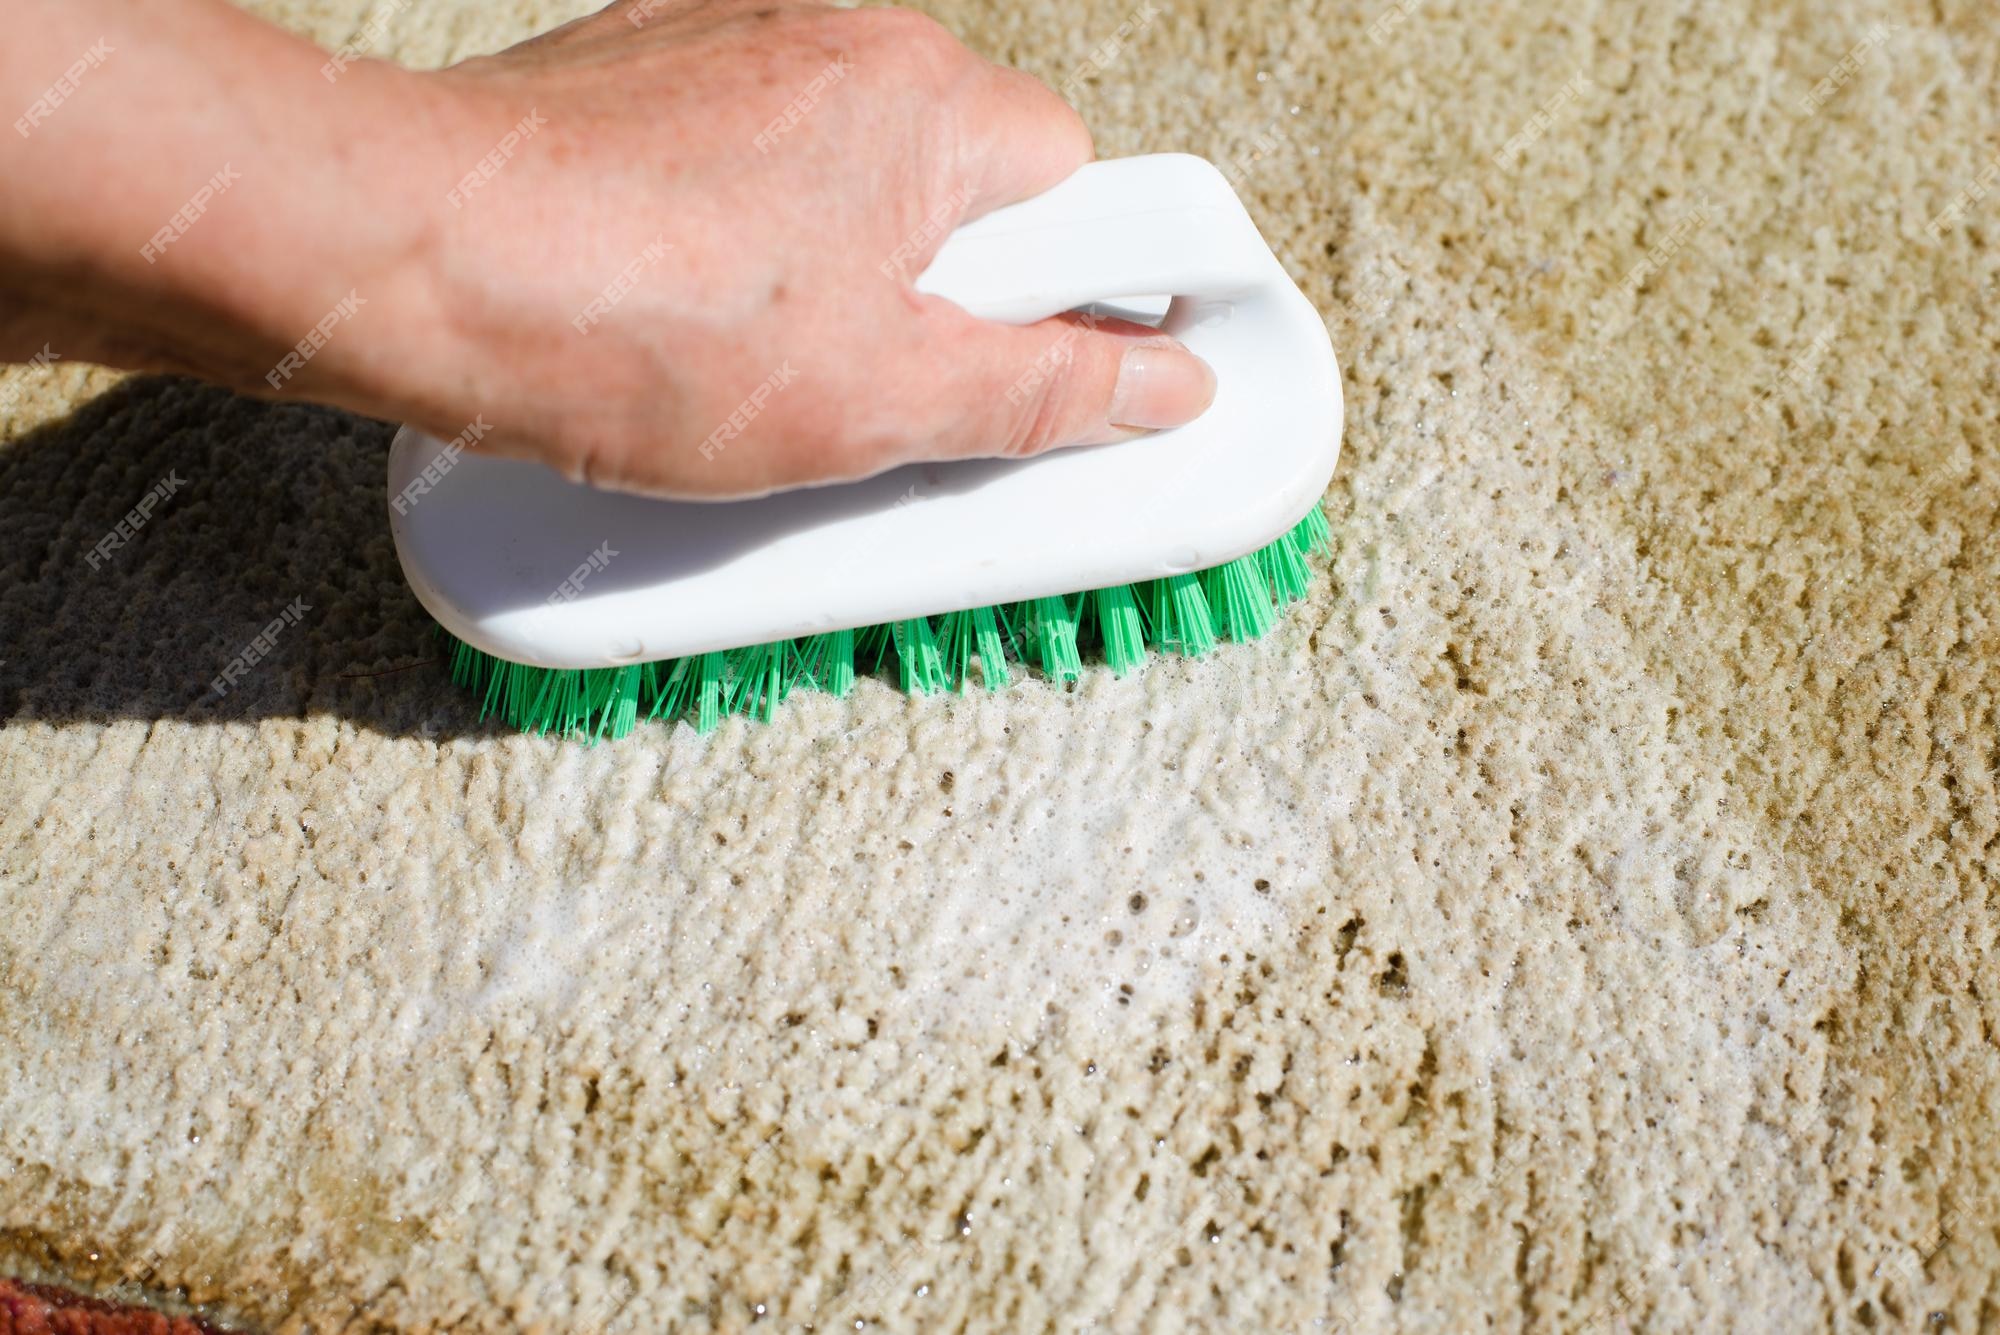 Premium Photo  Carpet cleaning with brush and detergent foam closeup of  womans hand cleaning wet rug home hygiene